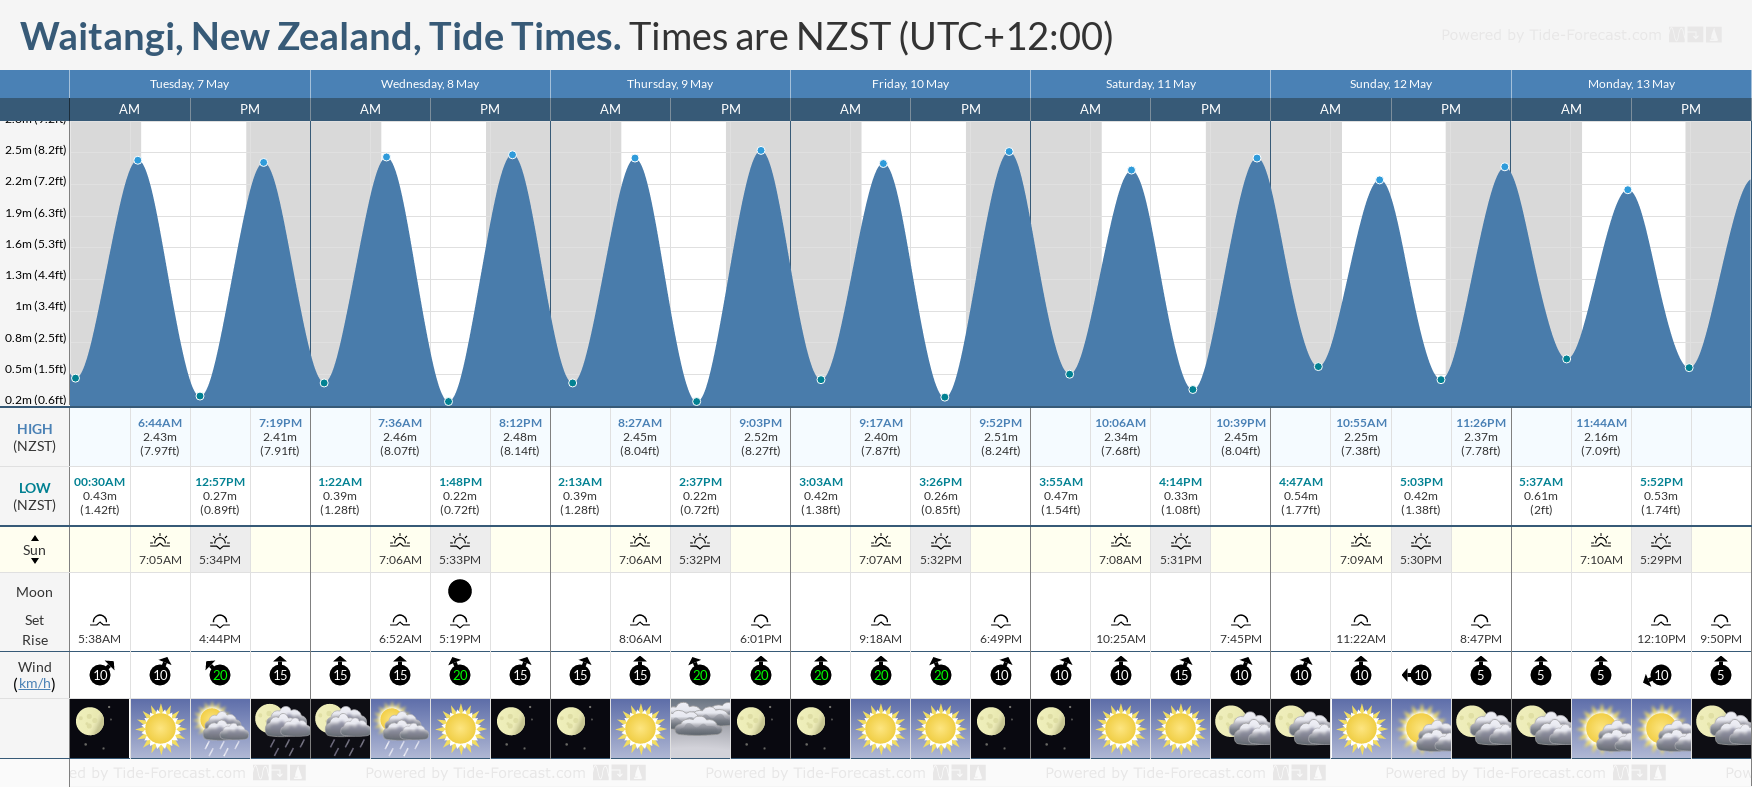 Waitangi, New Zealand Tide Chart including high and low tide tide times for the next 7 days